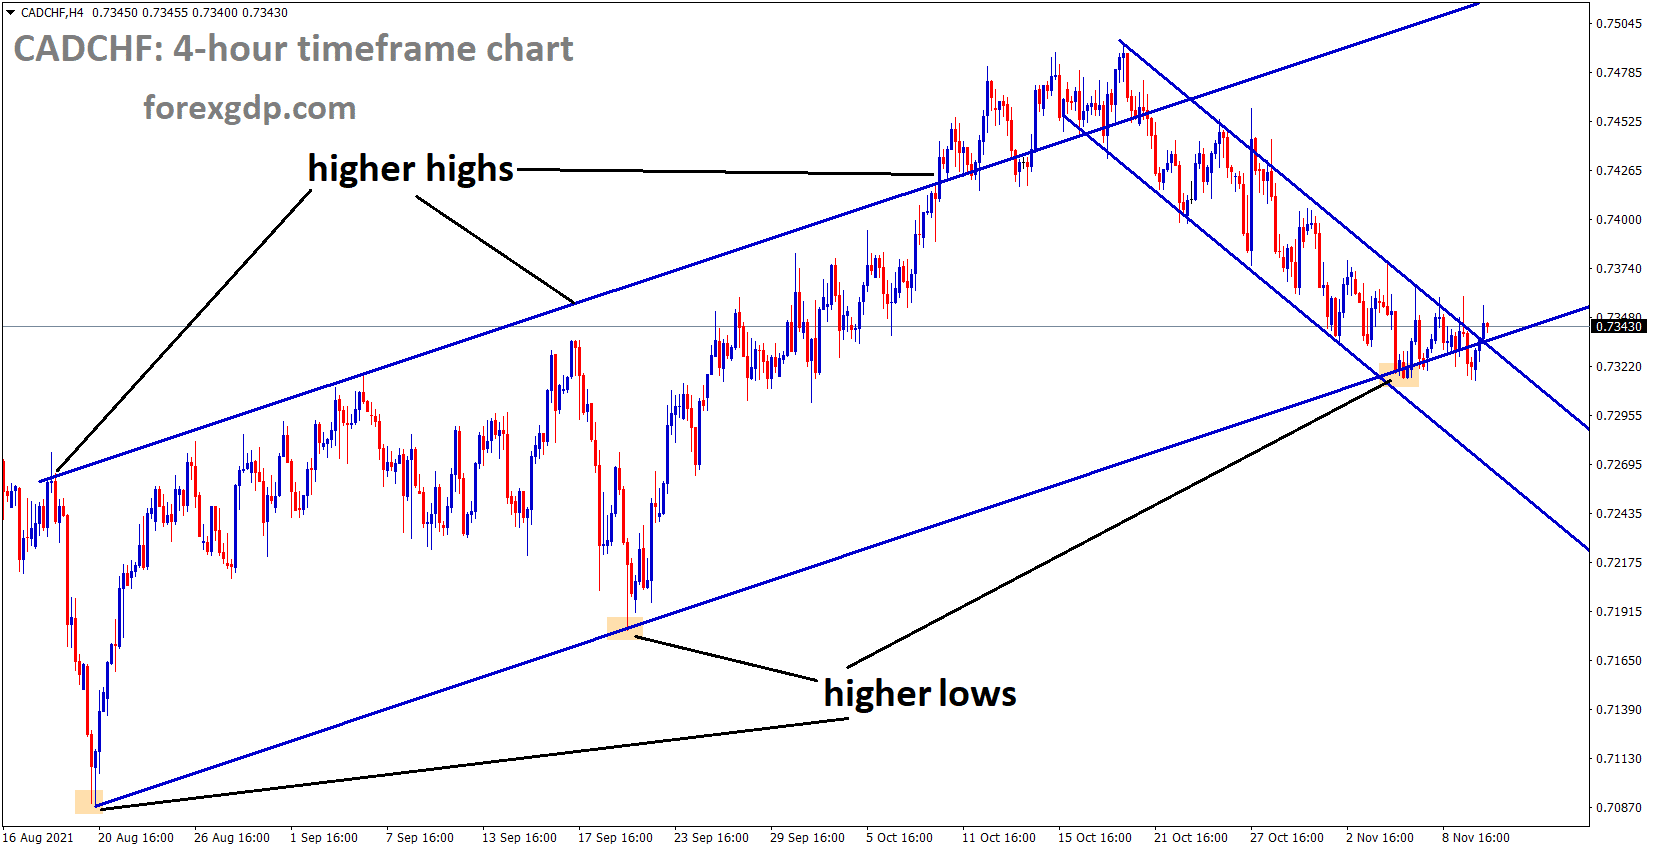 CADCHF reached the higher low area of the ascending channel and consolidation at the higher low area of the channel